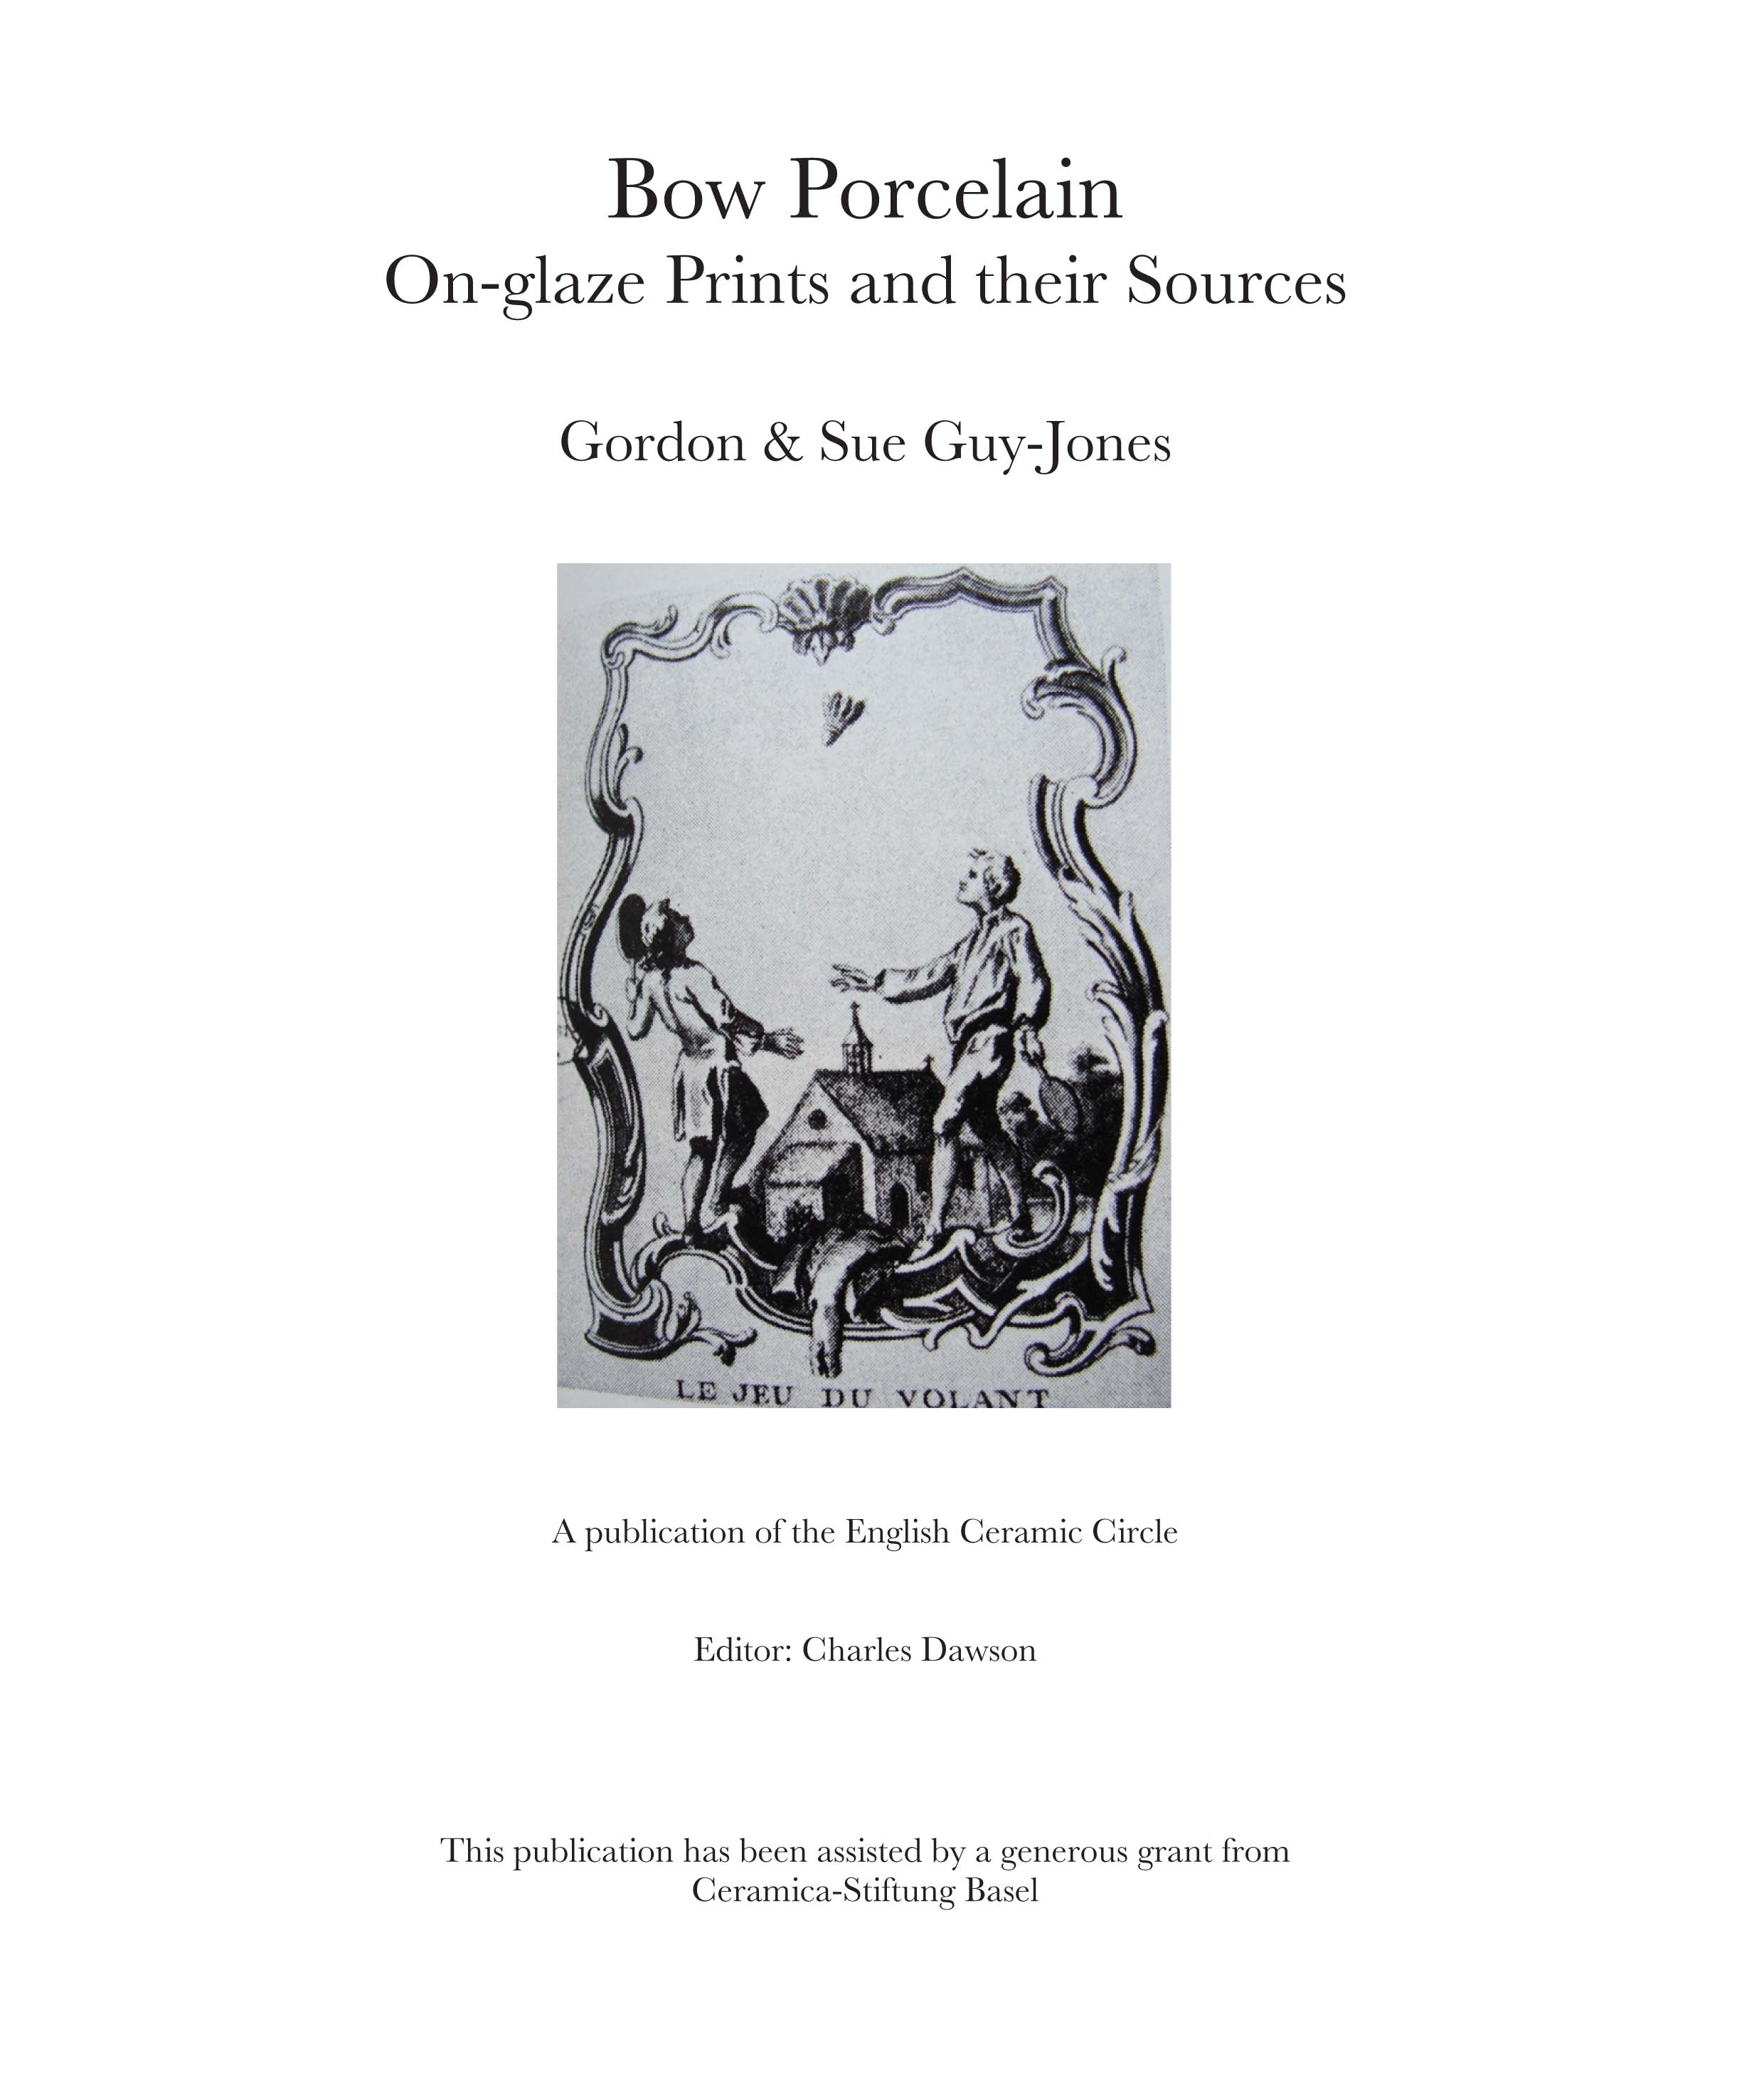 					View Bow Porcelain on-glaze Prints and their Sources - Part 1
				